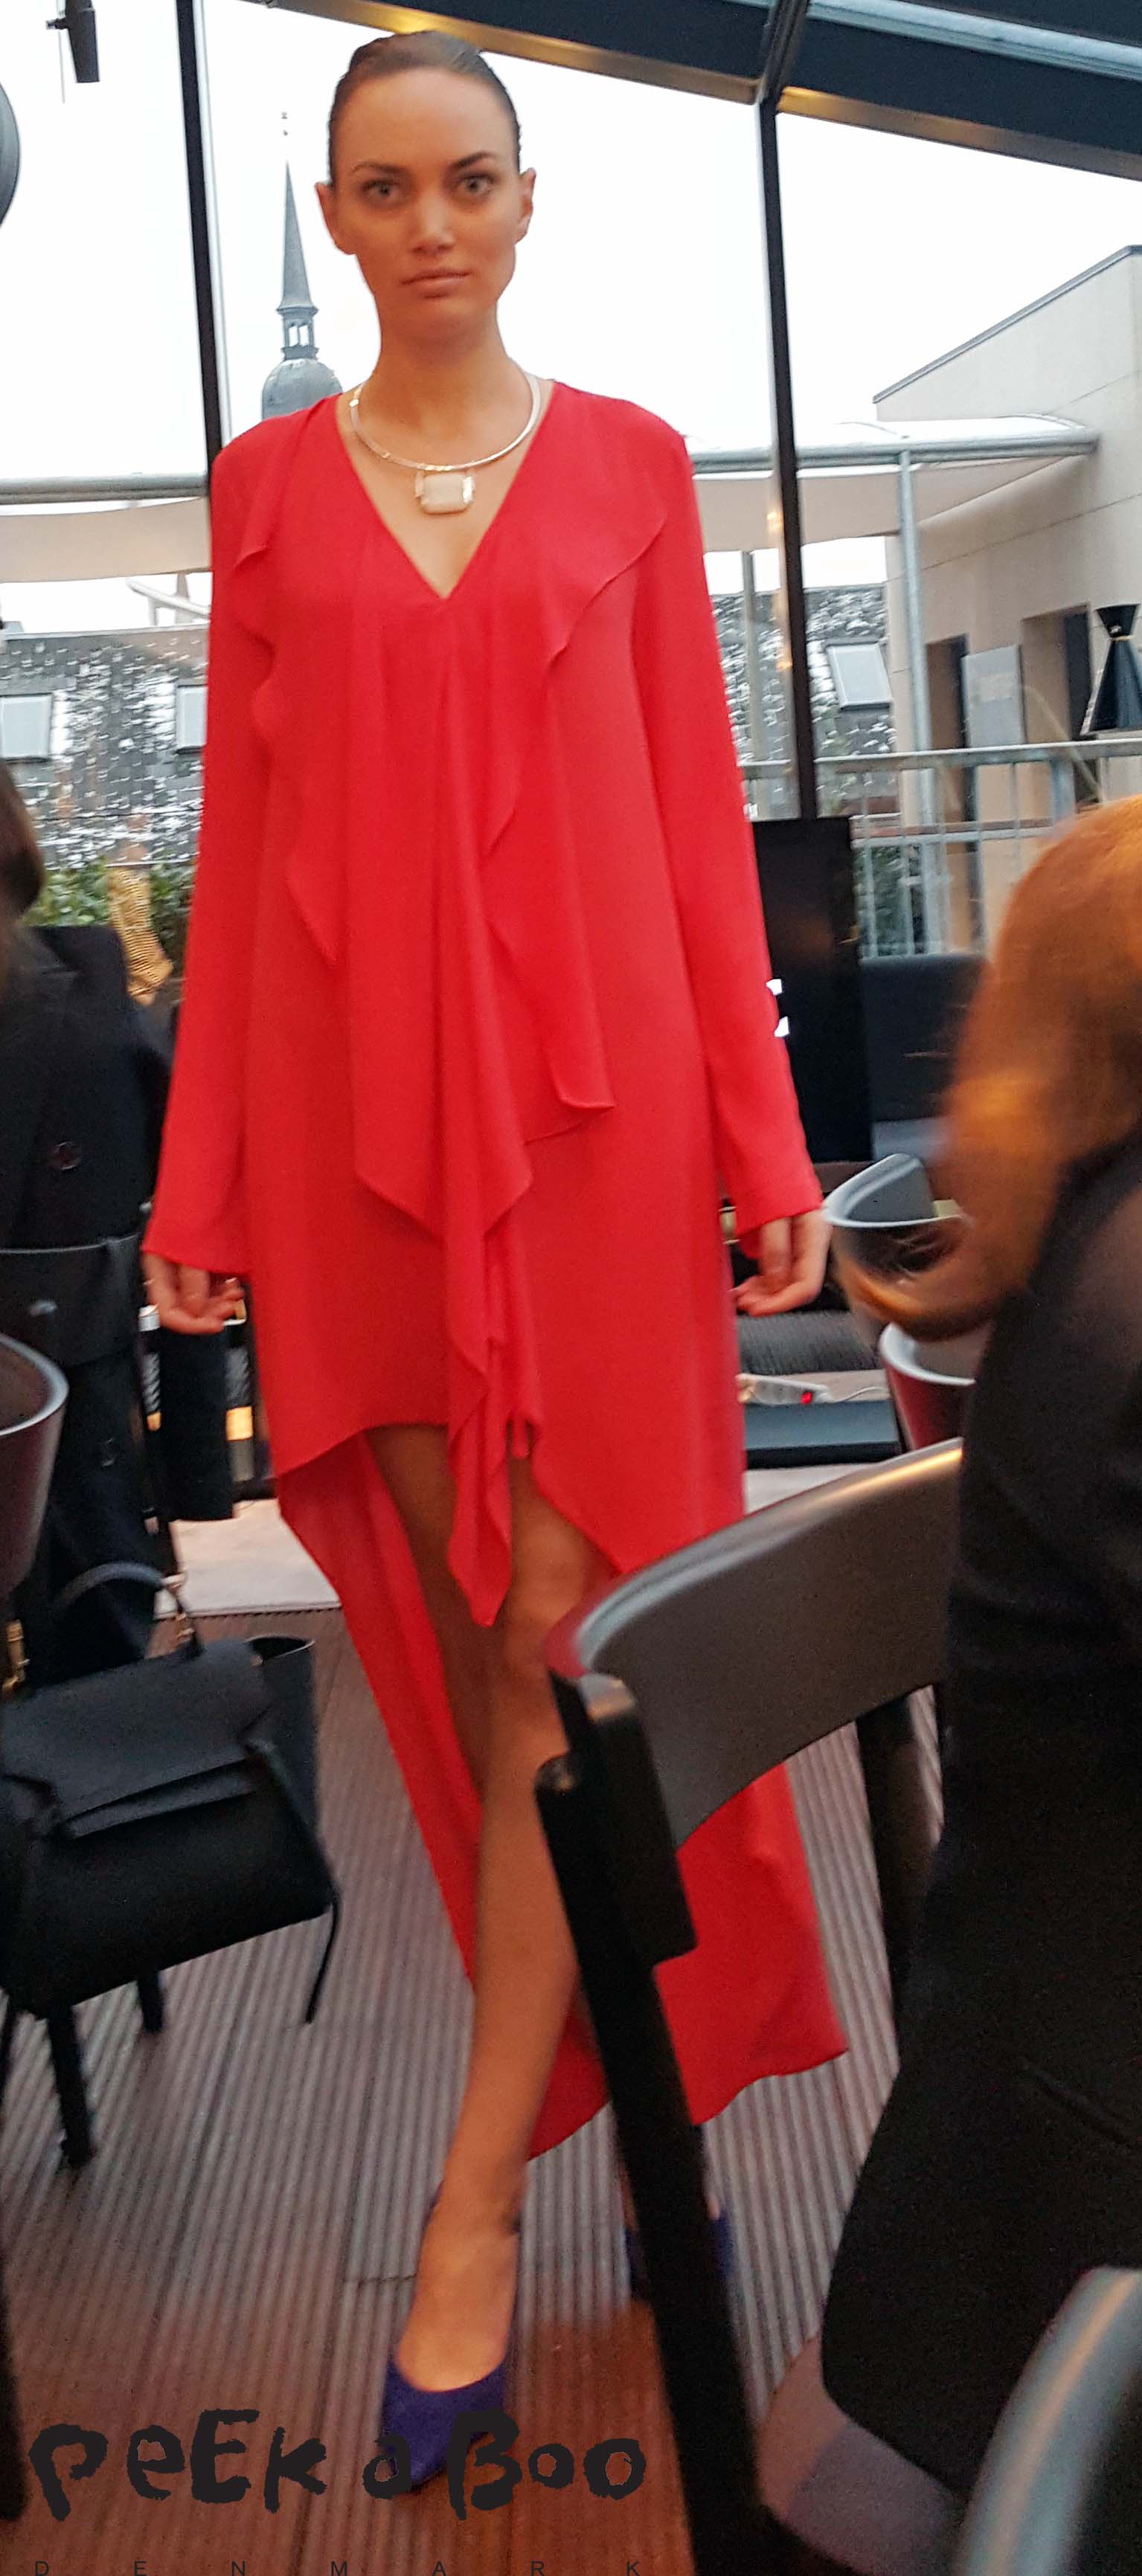 Orange party dress from BCBG Maxazria SS16 collection. They will open a shop in Copenhagen later this month.